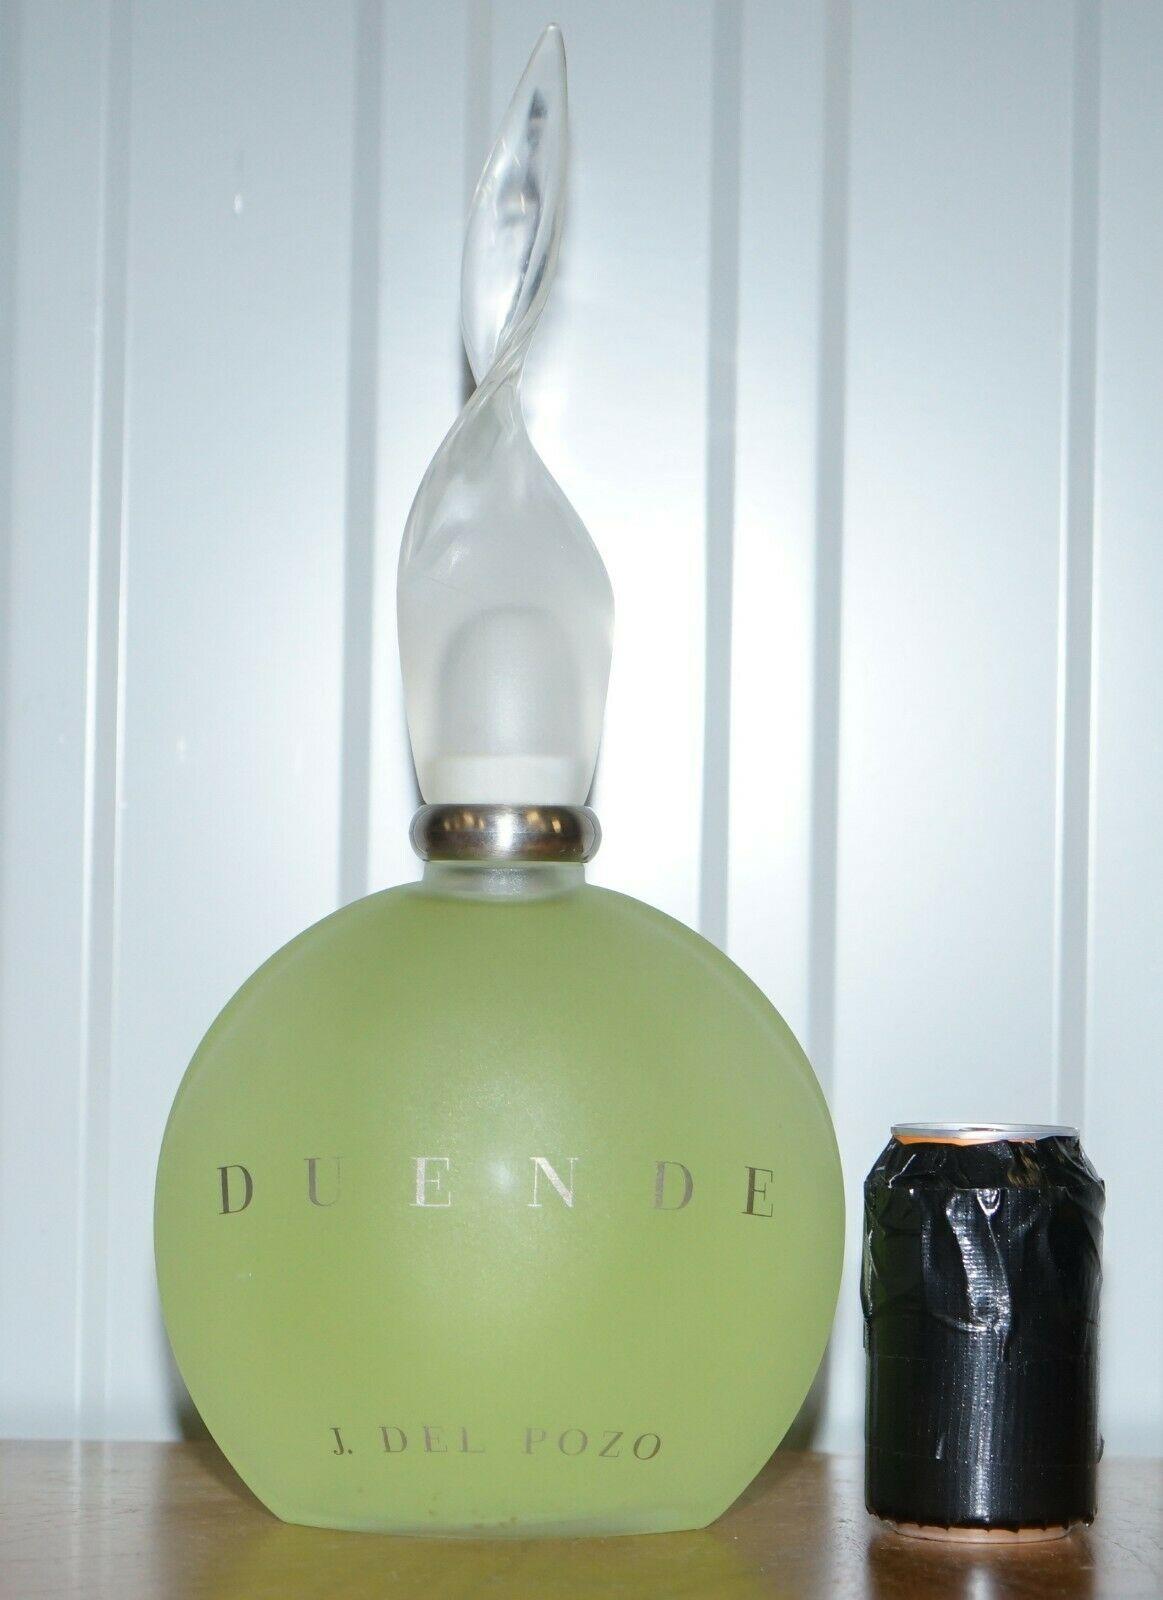 Wimbledon-Furniture

Wimbledon-Furniture is delighted to offer for sale this stunning Giant Factice scent bottle by Duende J. Del pozo

I have a large selection of these giant display bottles, most are Factice which means they don’t have the actual